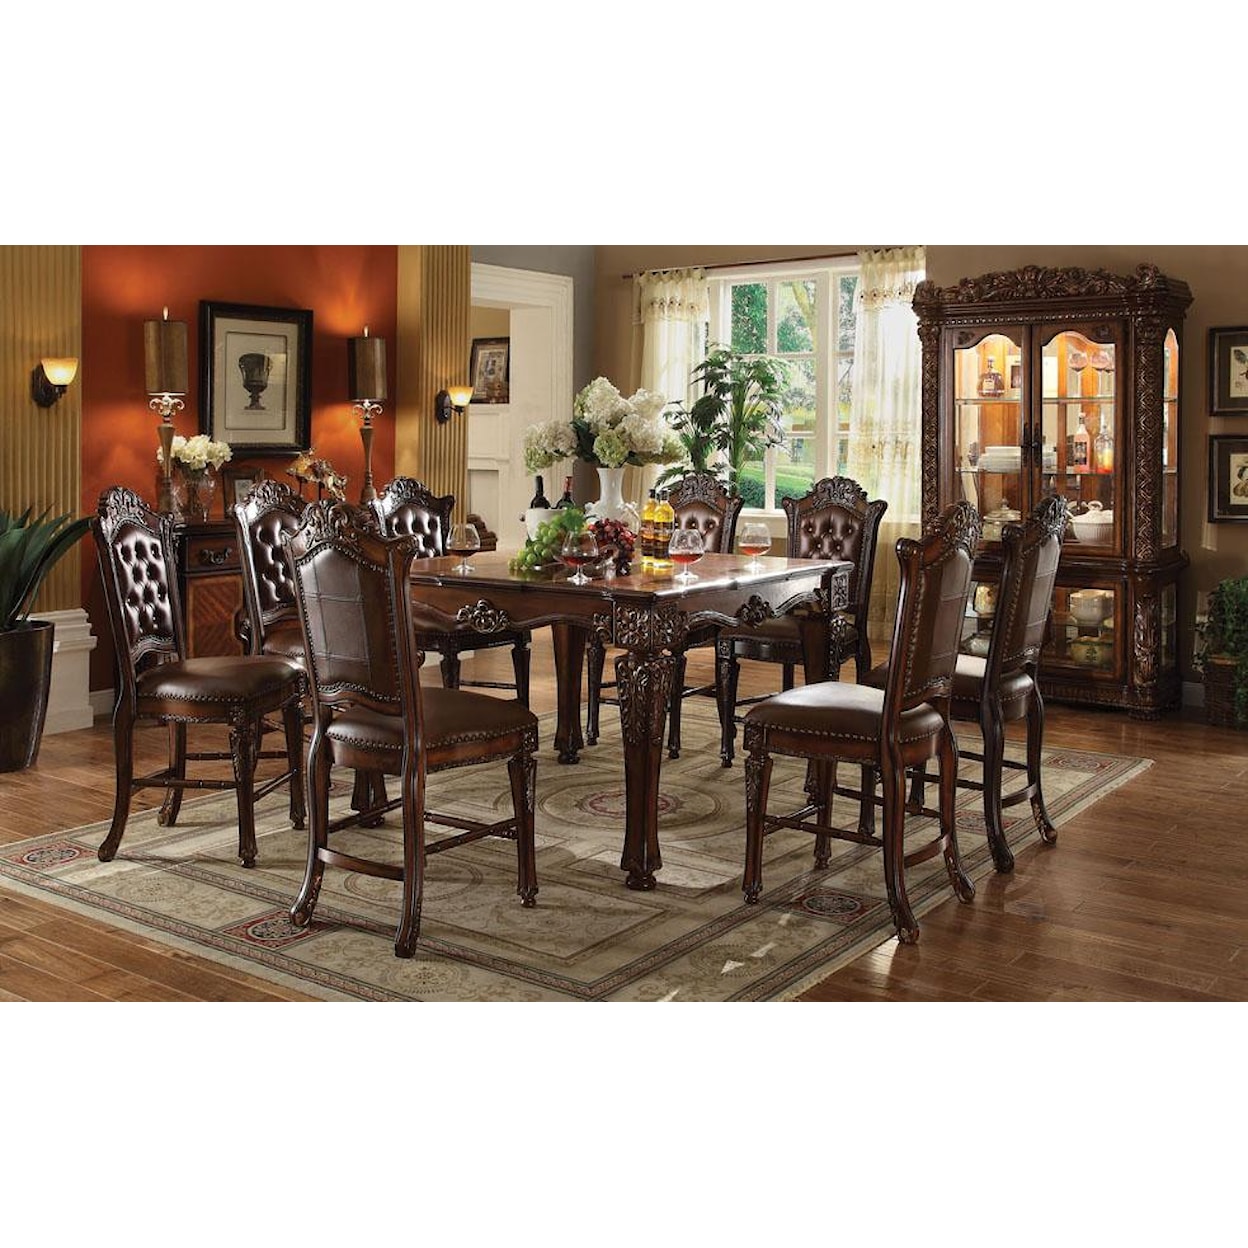 Acme Furniture Vendome 9 Piece Table and Chairs Set